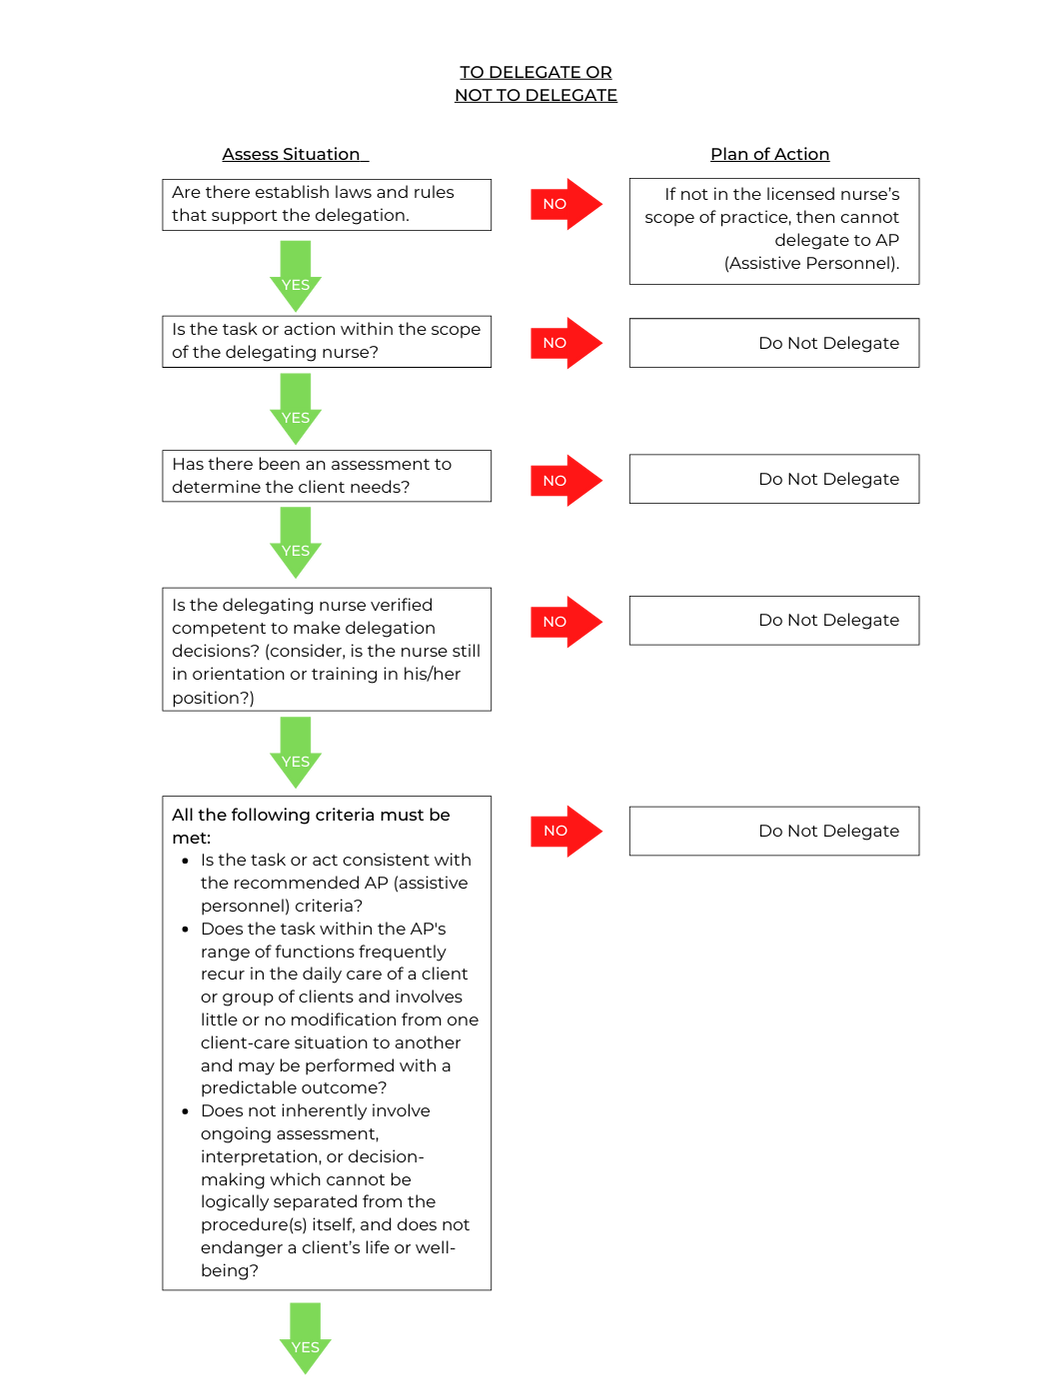 Delegation-Decision-Tree-2a-1.png